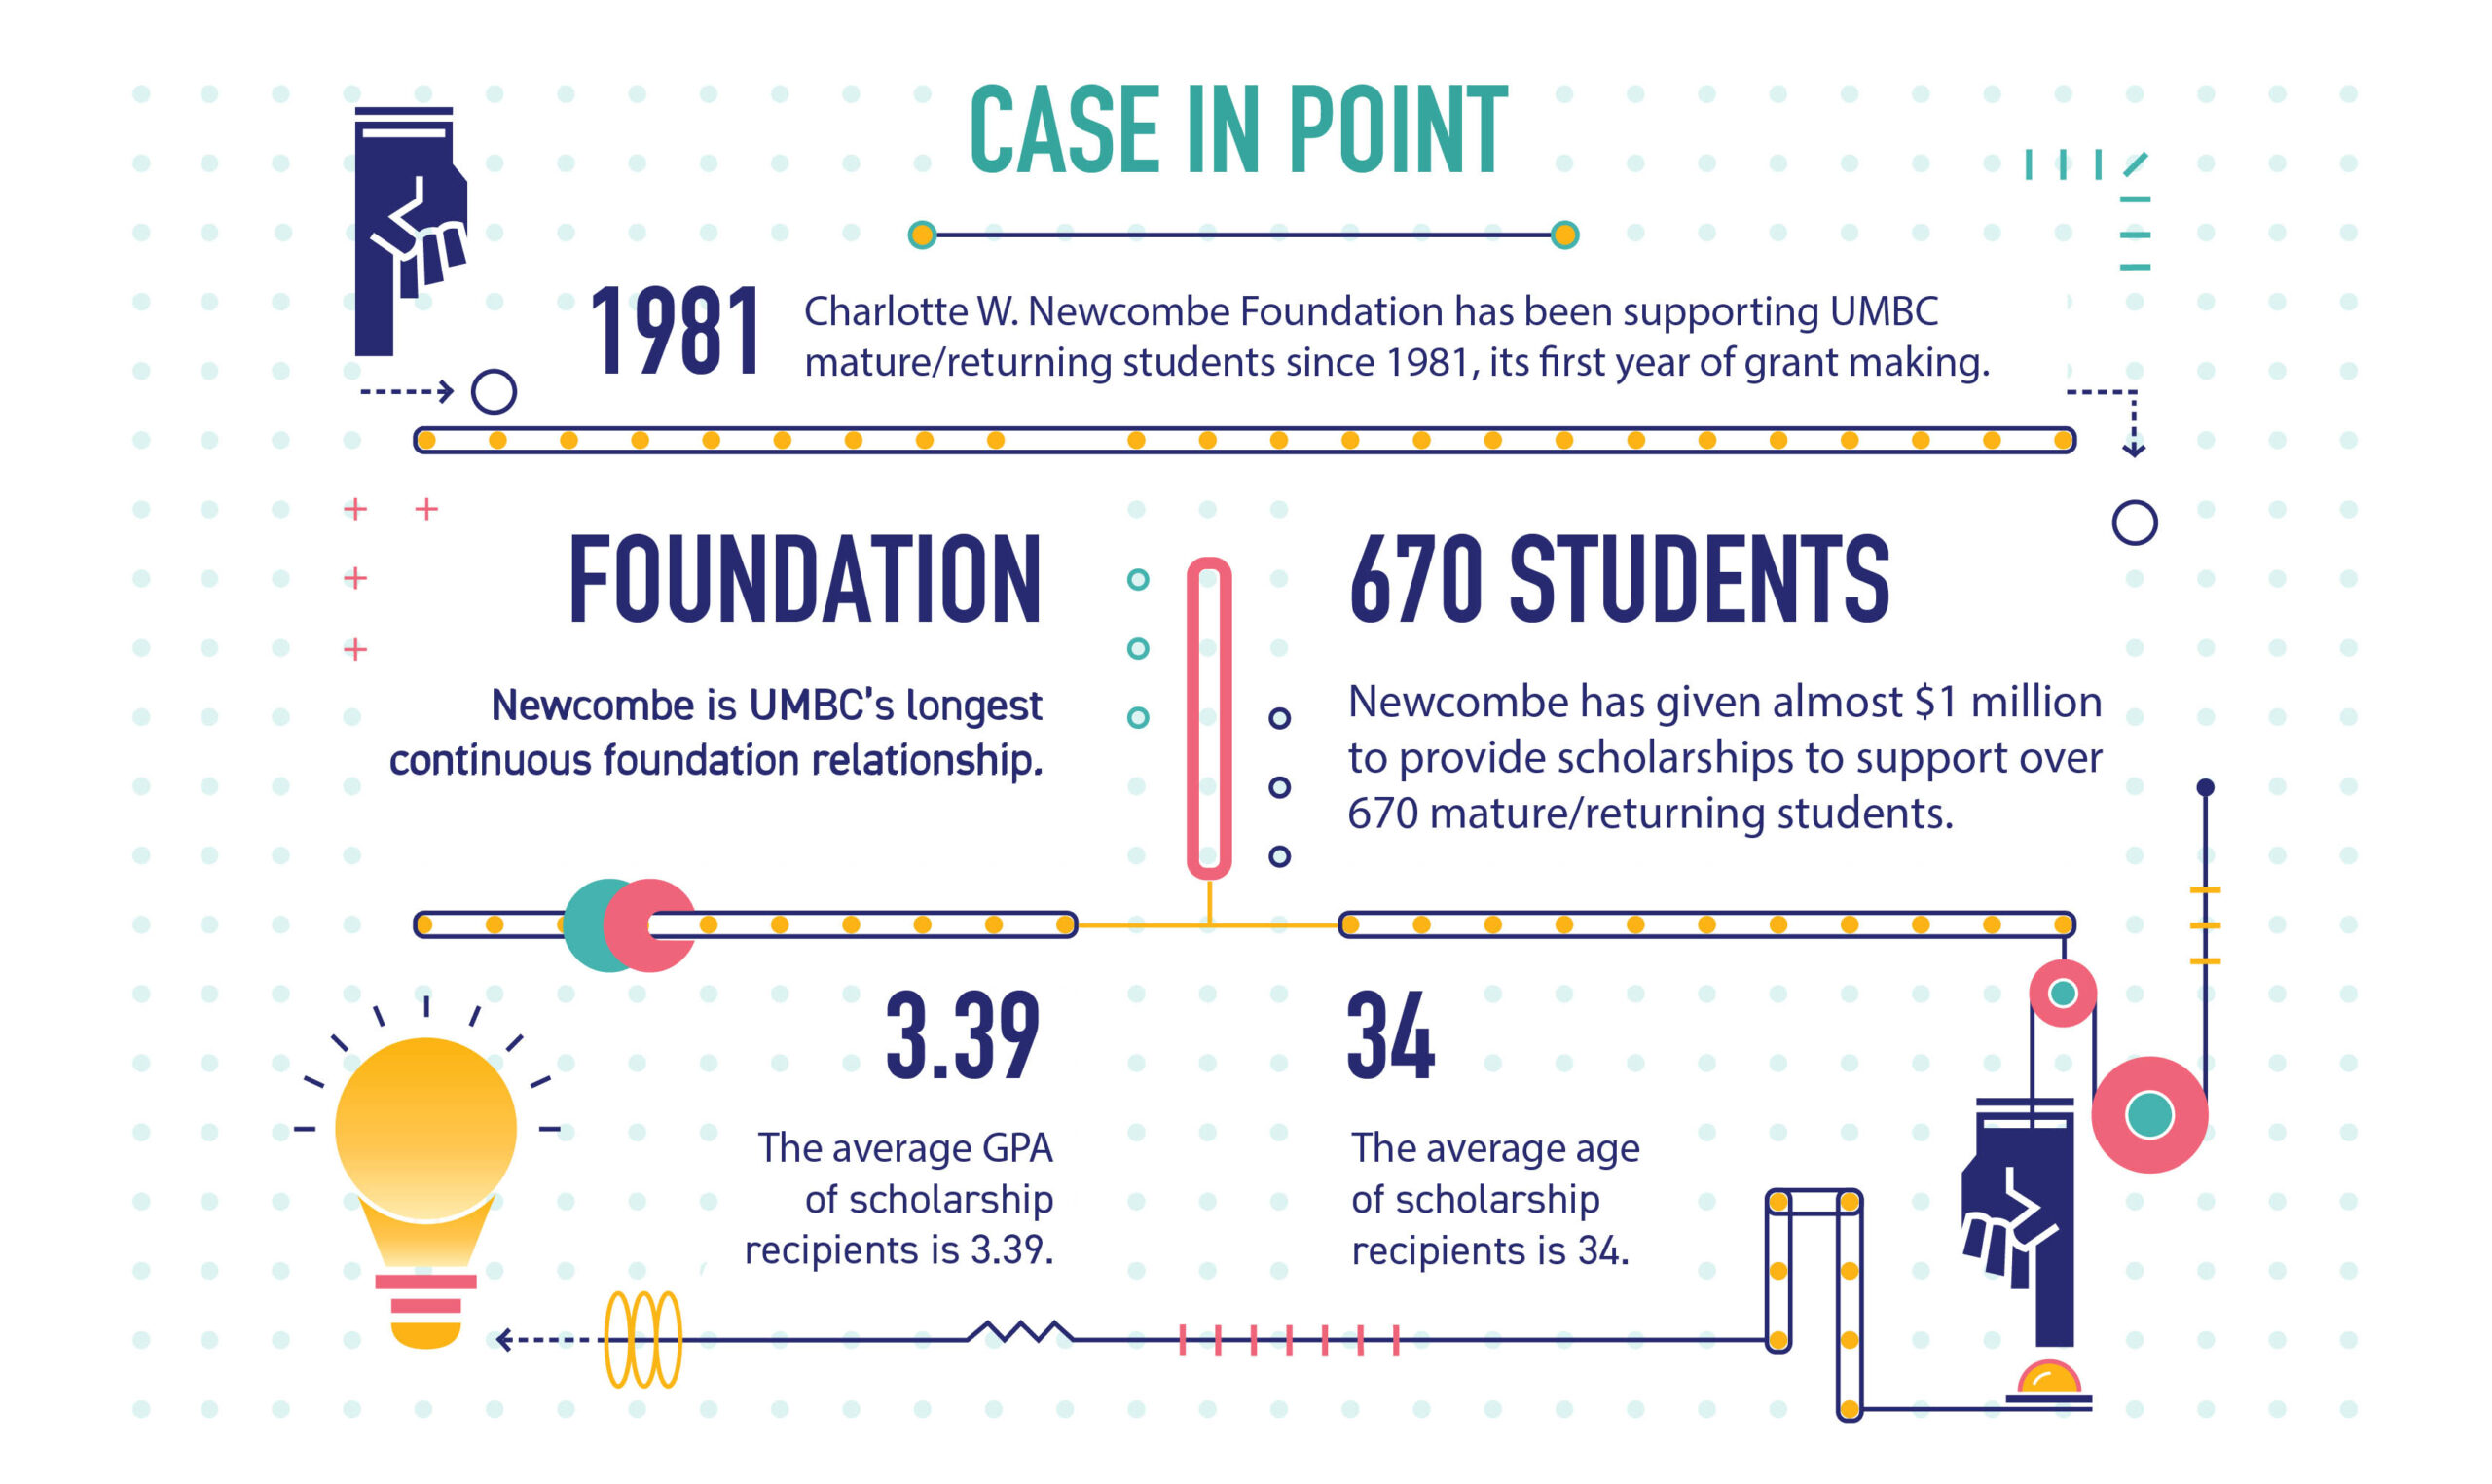 an infographic that spells out the Newcombe Foundation's 40+ year partnership with UMBC that has distributed almost a million dollars in scholarship money to 650 returning mature students